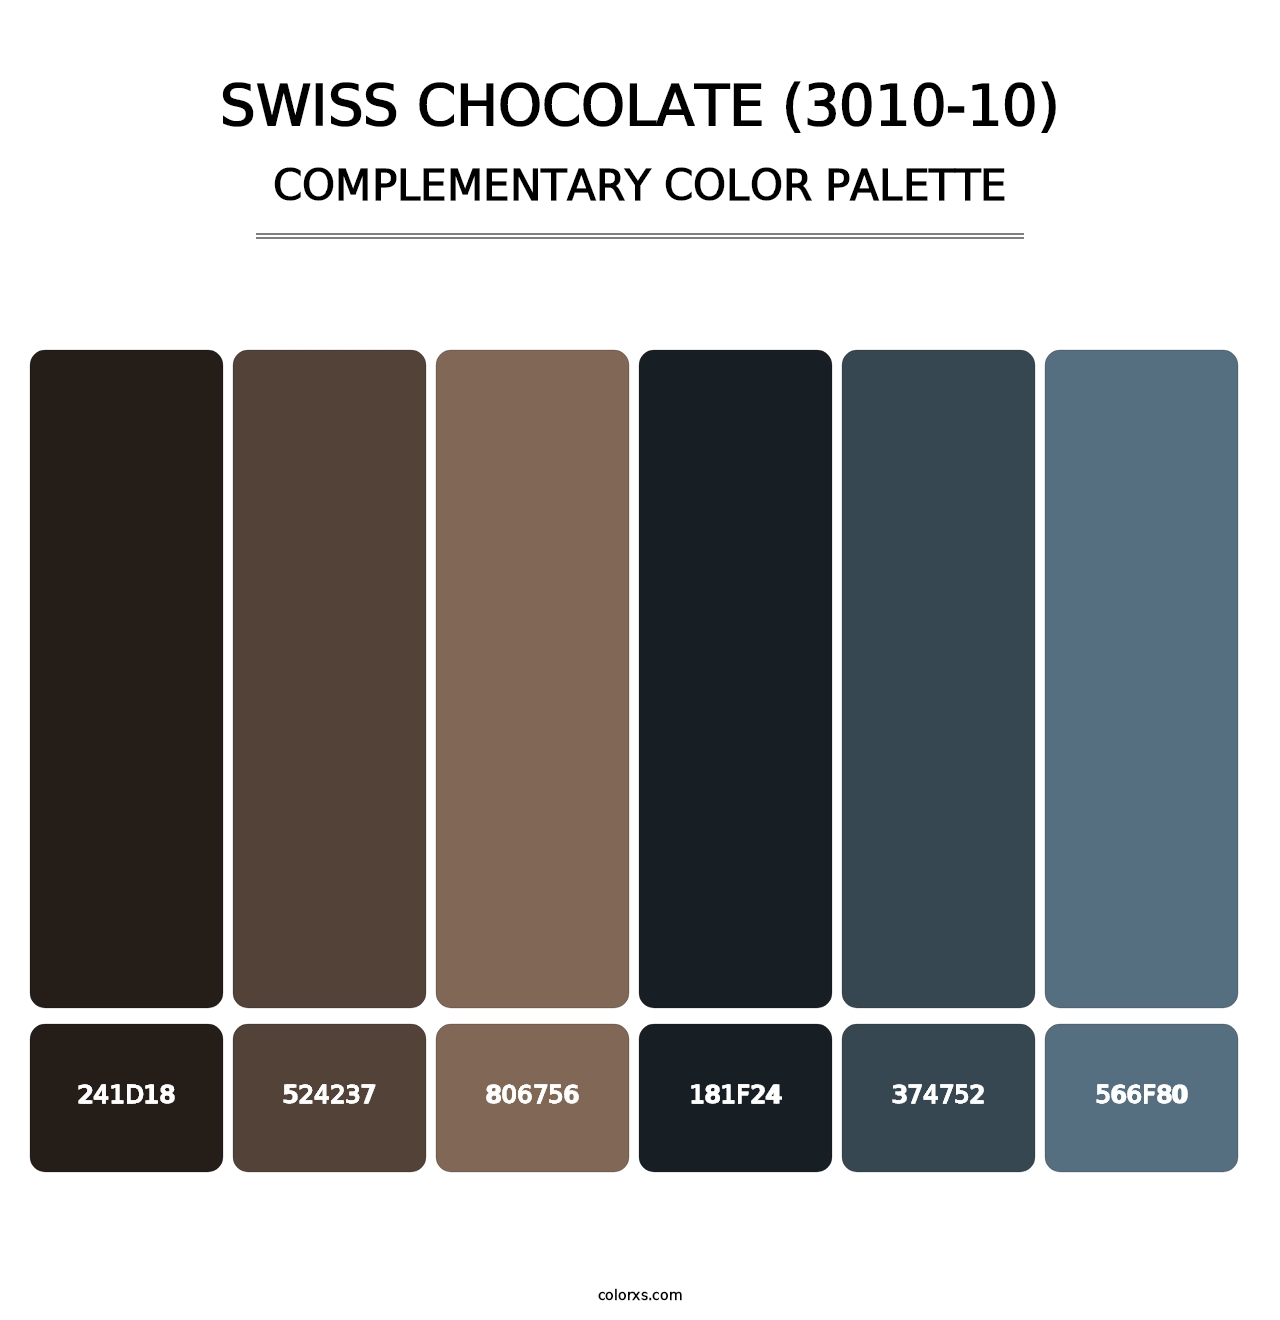 Swiss Chocolate (3010-10) - Complementary Color Palette